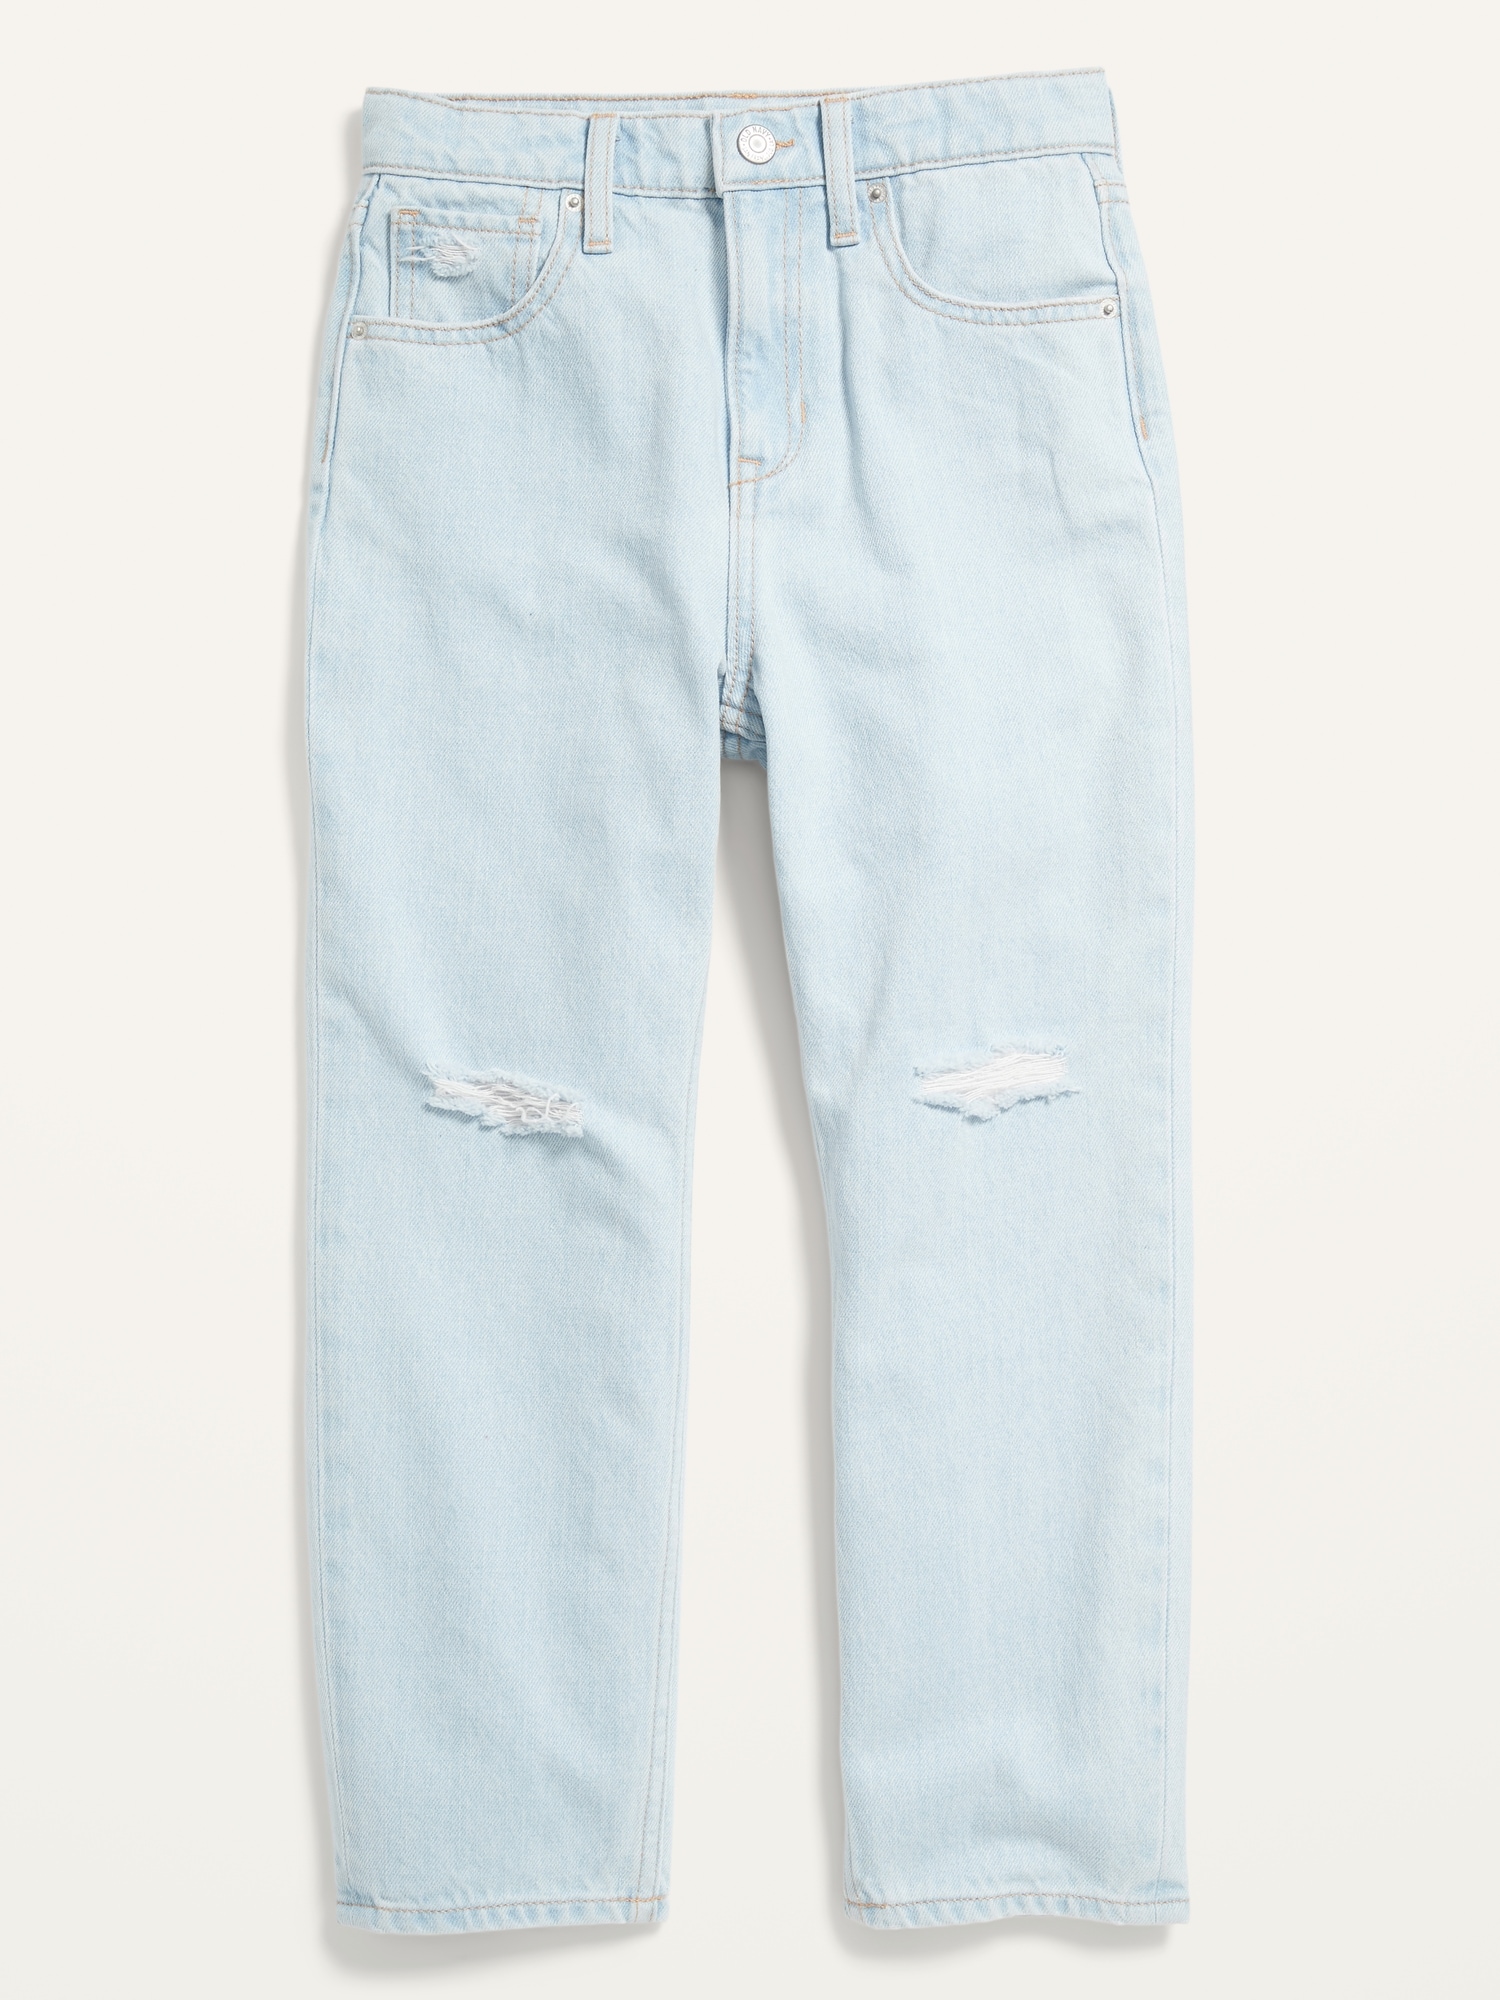 Old Navy High-Waisted Slouchy Straight Light-Wash Ripped Jeans for Girls blue. 1